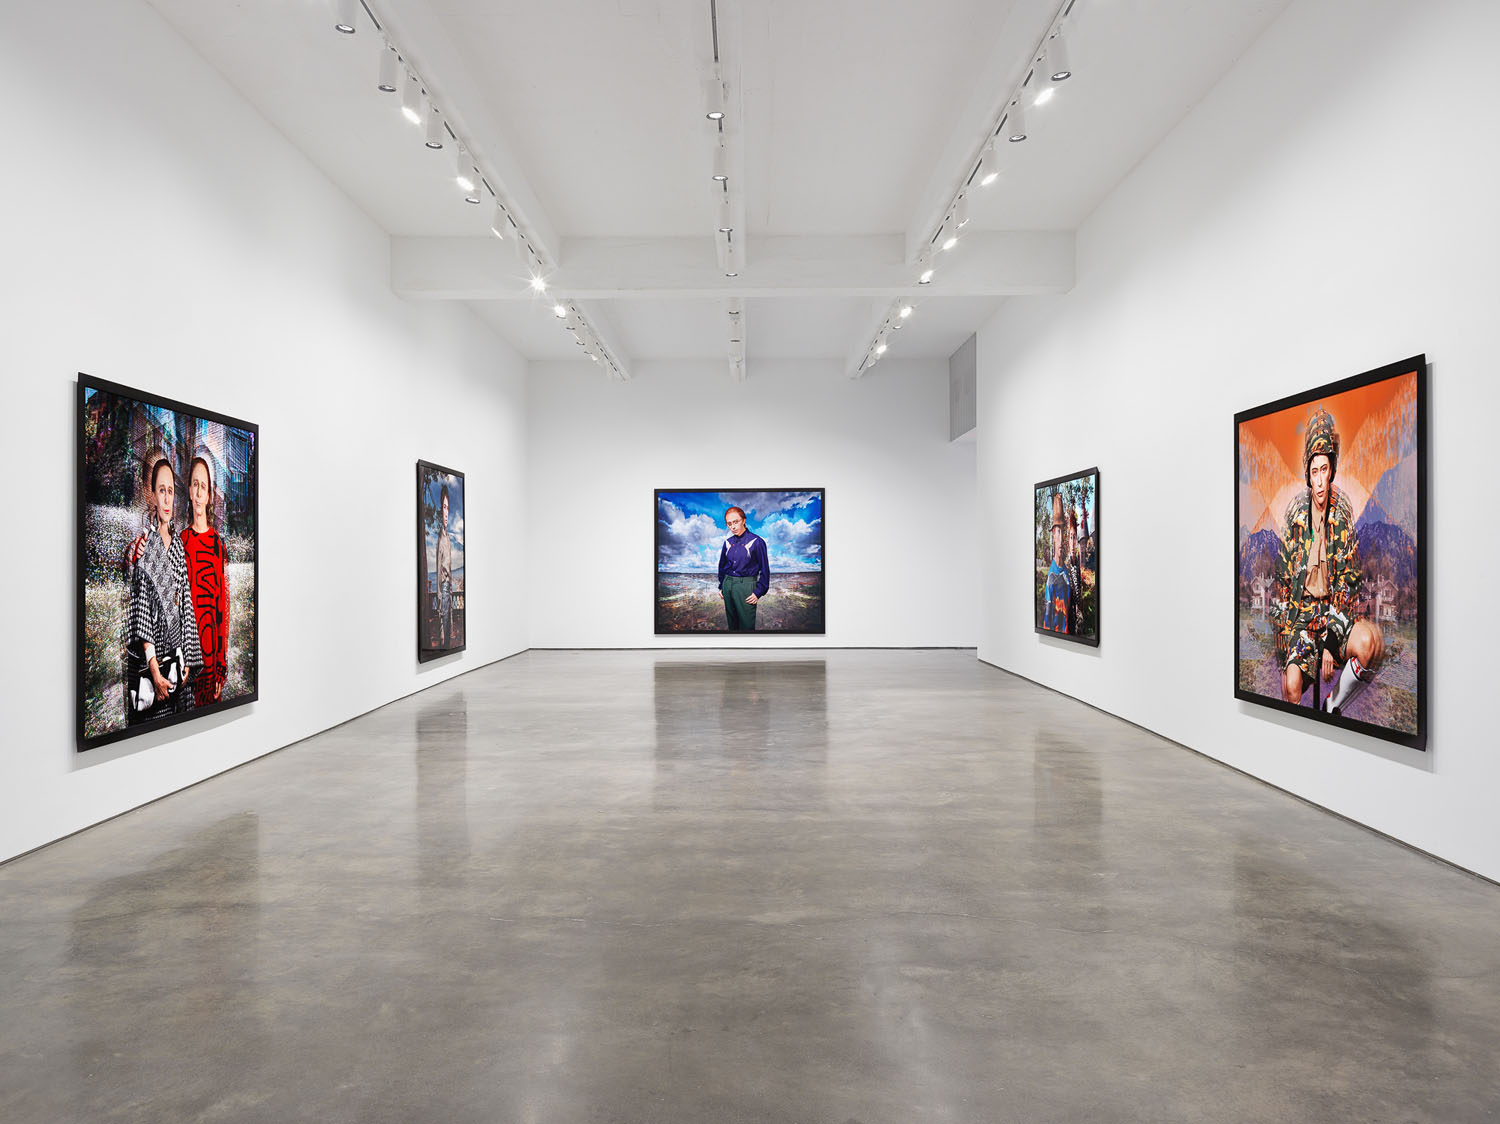 Cindy Sherman Exhibition at Fondation Louis Vuitton: I dress up, so I am